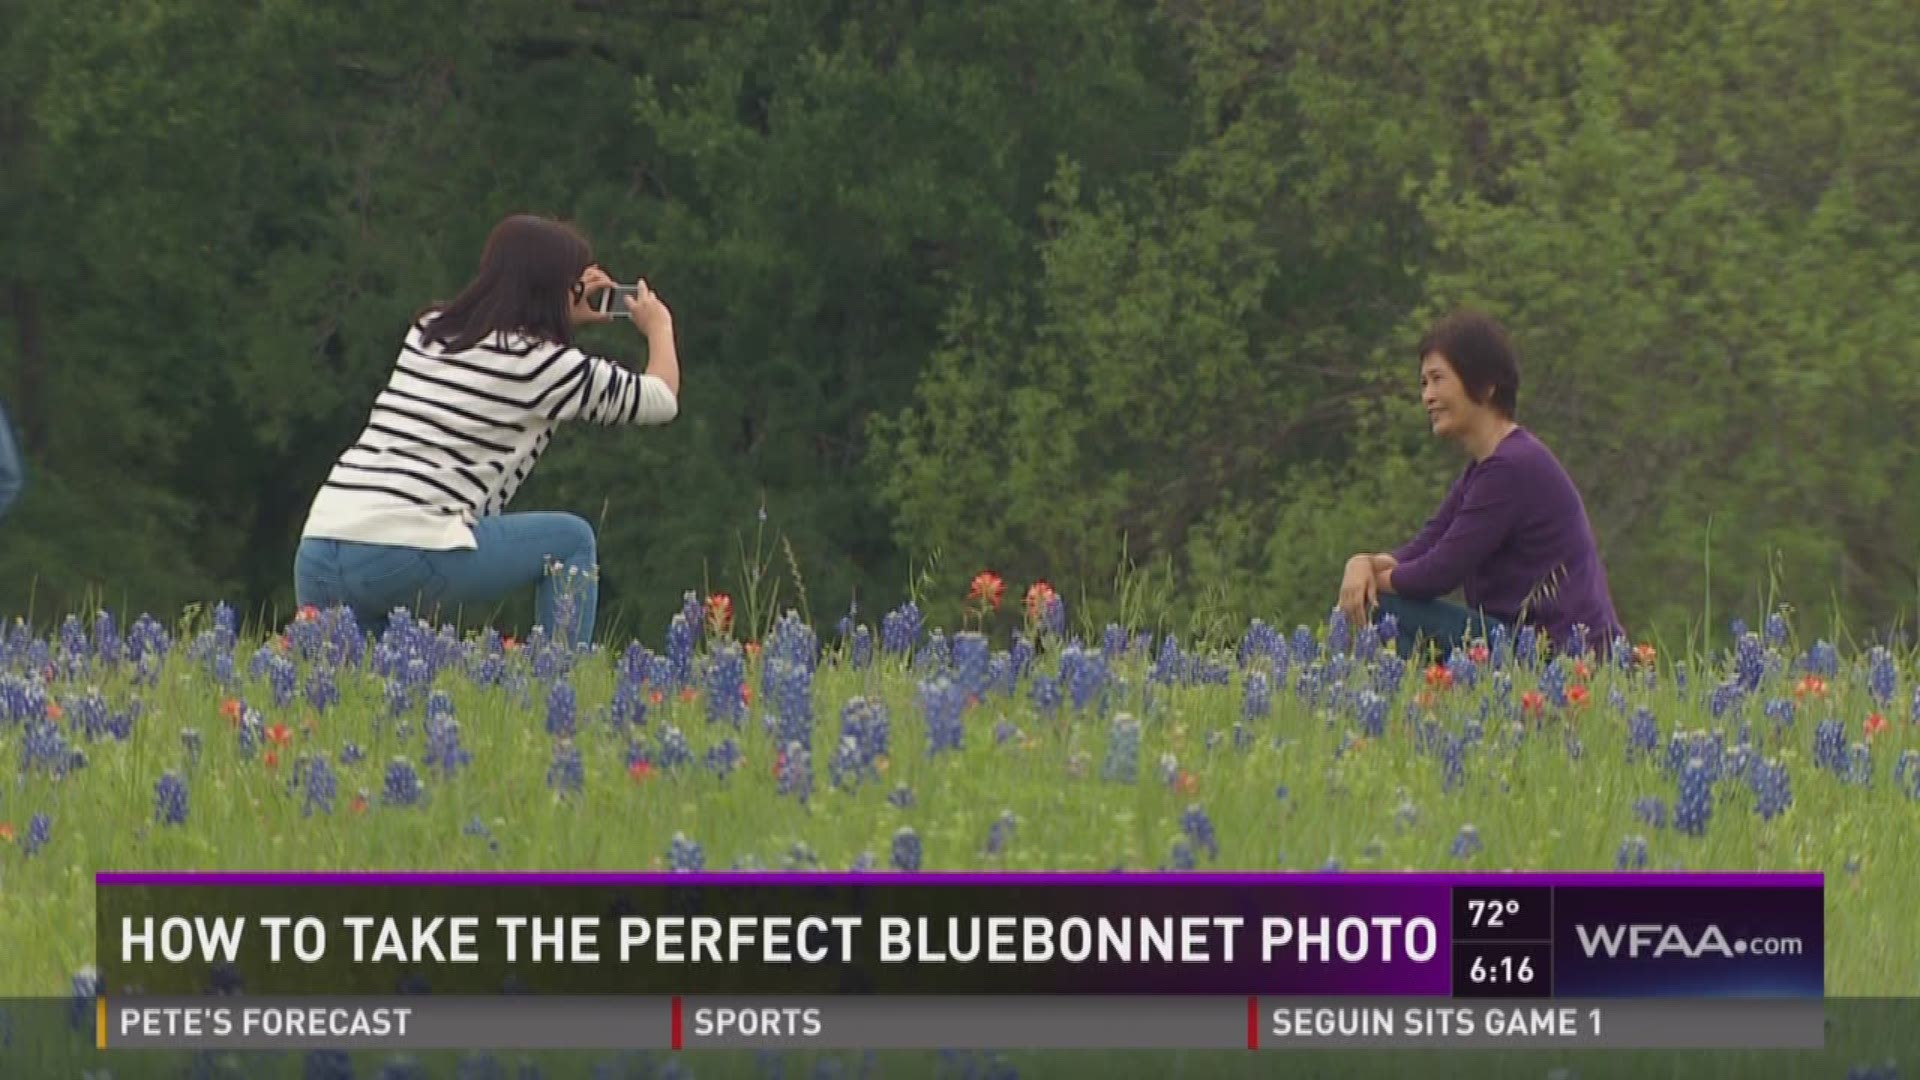 It's that time of year in Texas, when bluebonnets bloom as far as the eye can see in the countryside. News 8's Sebastian Robertson has some tips if you're heading out to take pictures amongst the flowers.